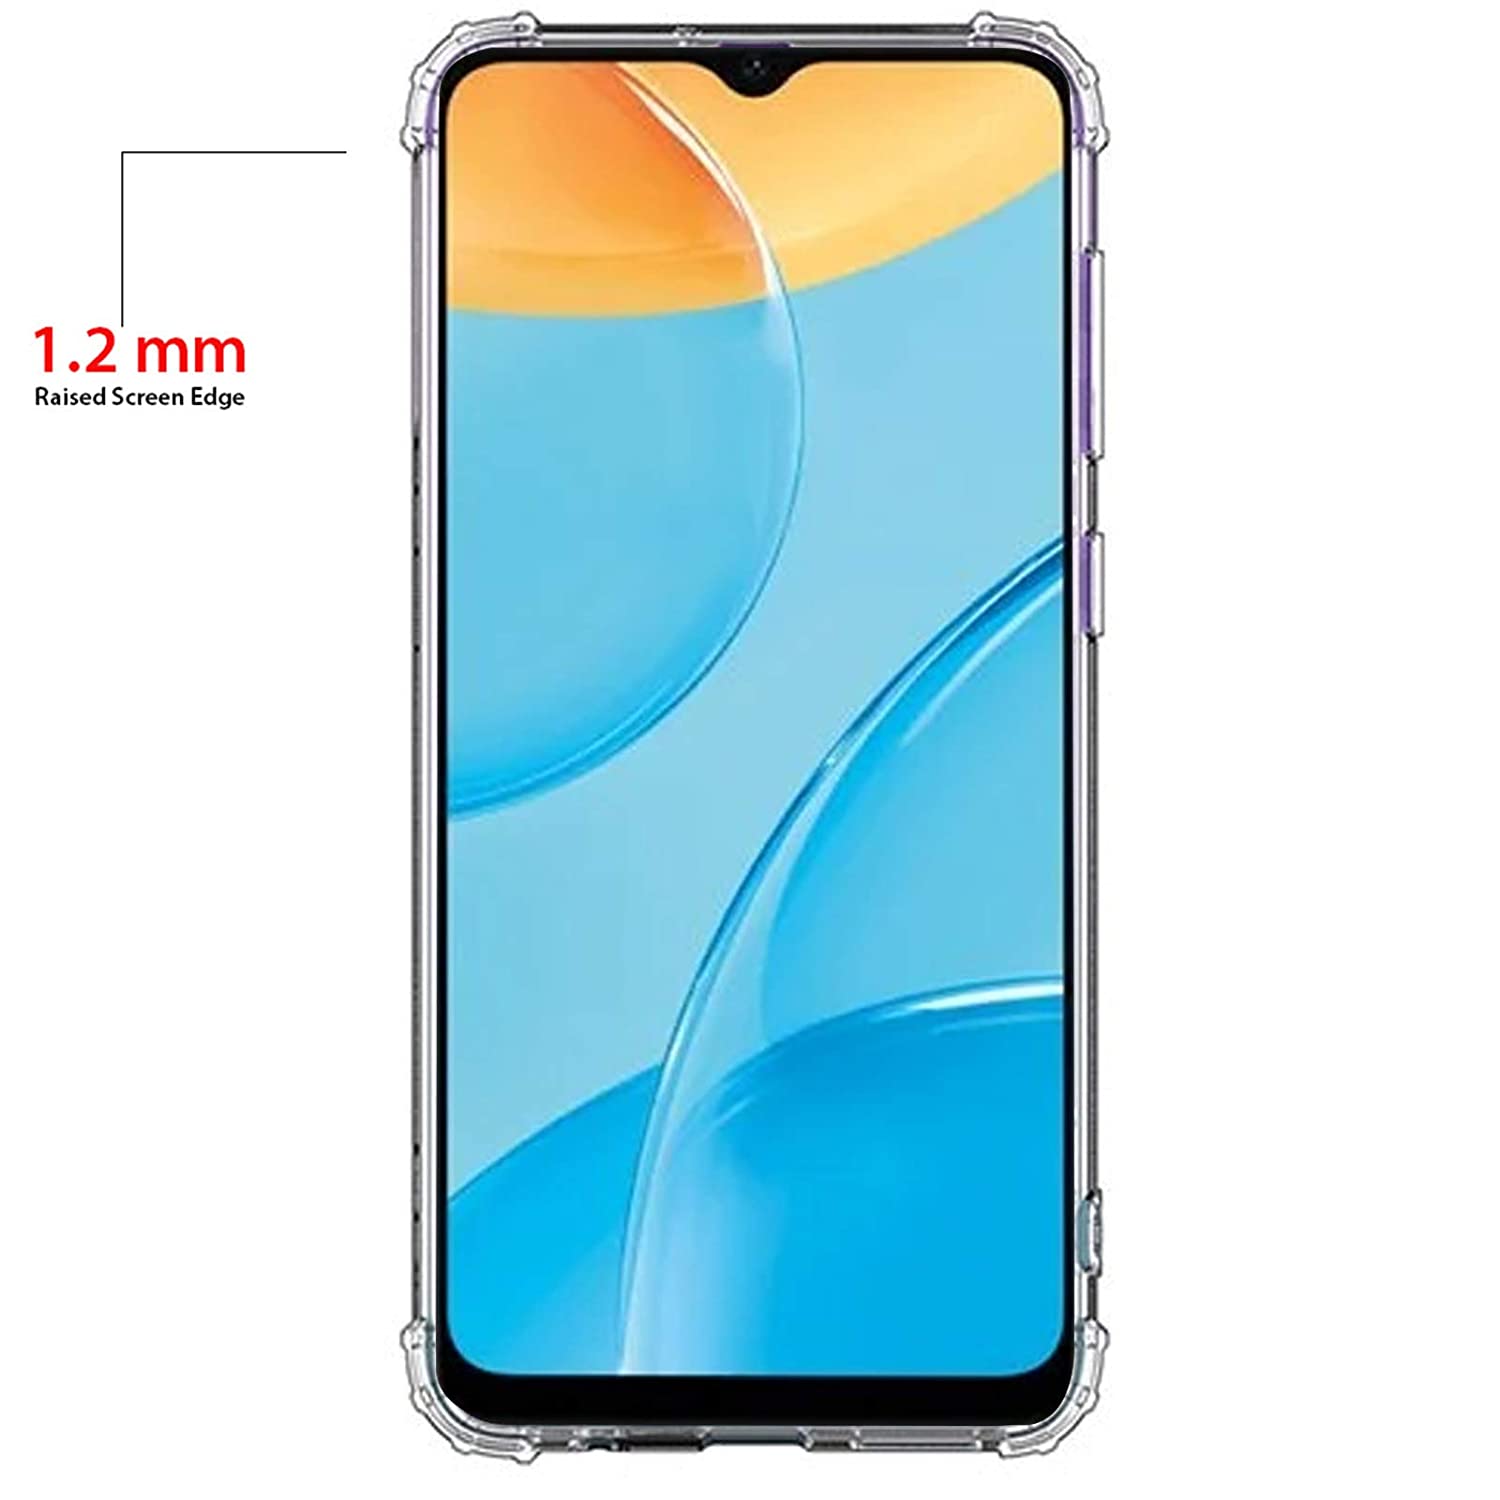 Ốp lưng silicon dẻo cho Oppo A15 / Oppo A15s hiệu Ultra Thin trong suốt